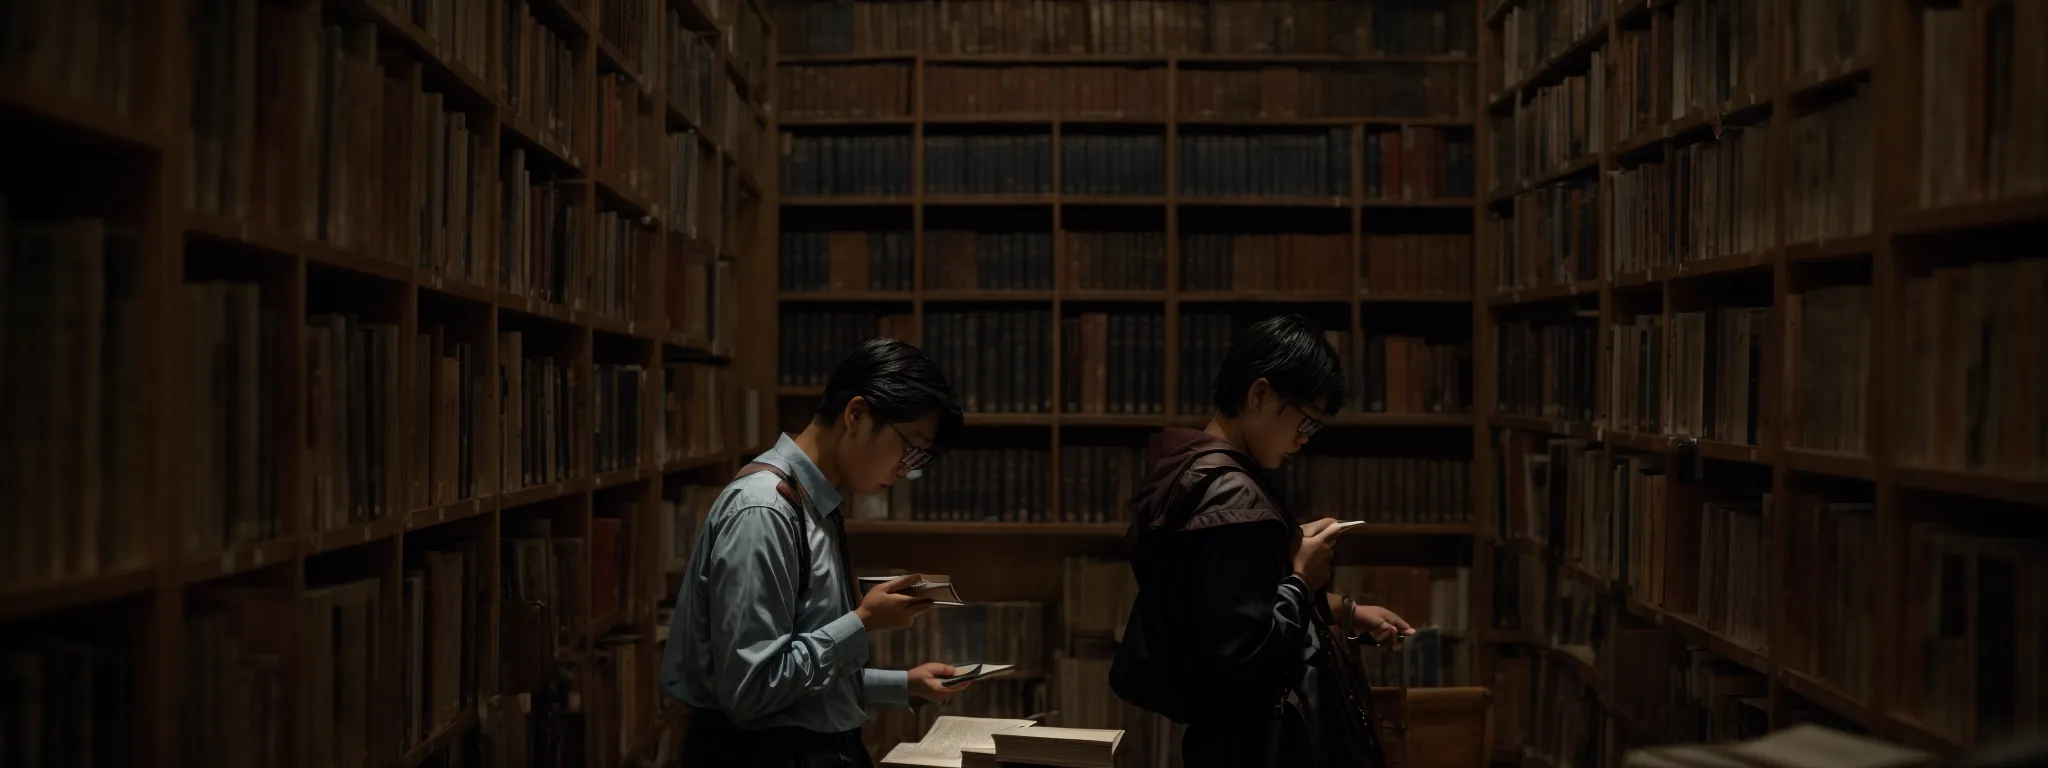 a scholar poring over books and notes, surrounded by library shelves.